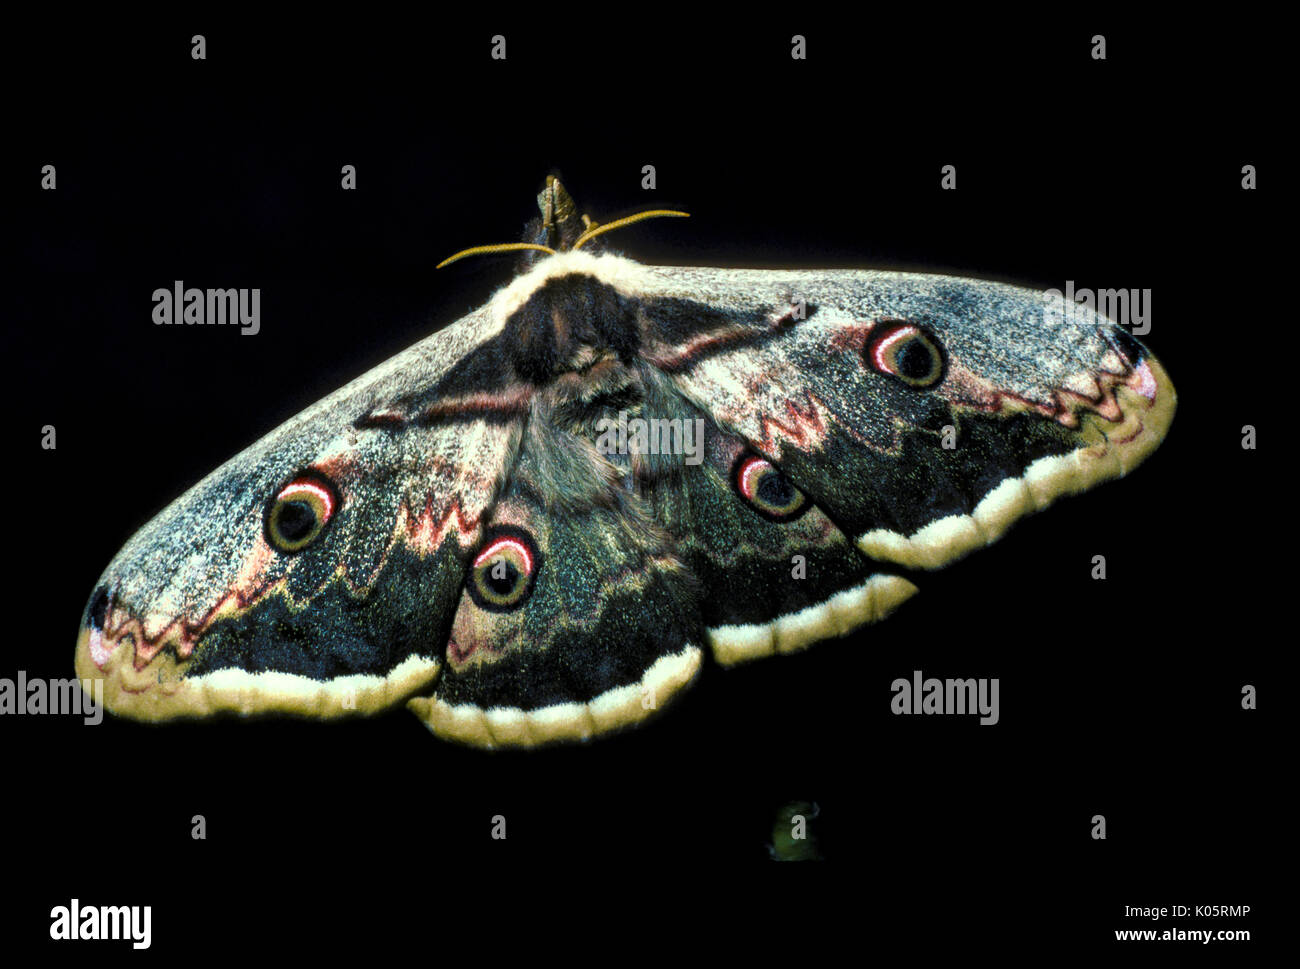 Giant Peacock Moth, Saturnia pyri, Europe, largest European Moth also called Great Peacock Moth, Giant Emperor Moth or Viennese Emperor, adult wings o Stock Photo